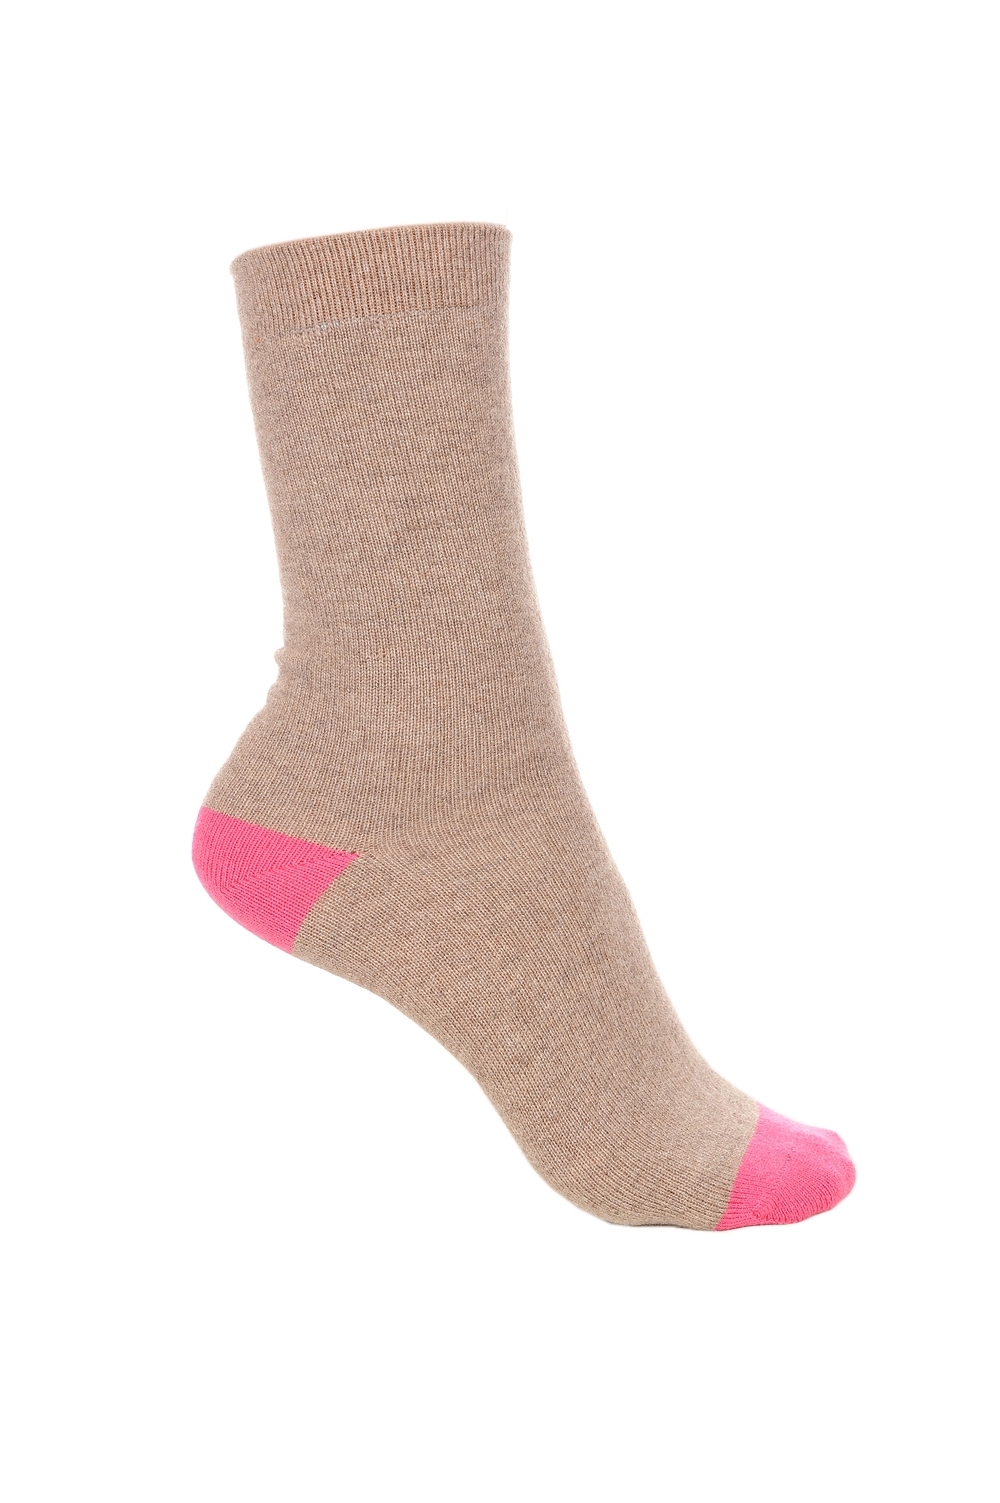 Cachemire & Elasthanne accessoires chaussettes frontibus natural brown rose shocking 39 42